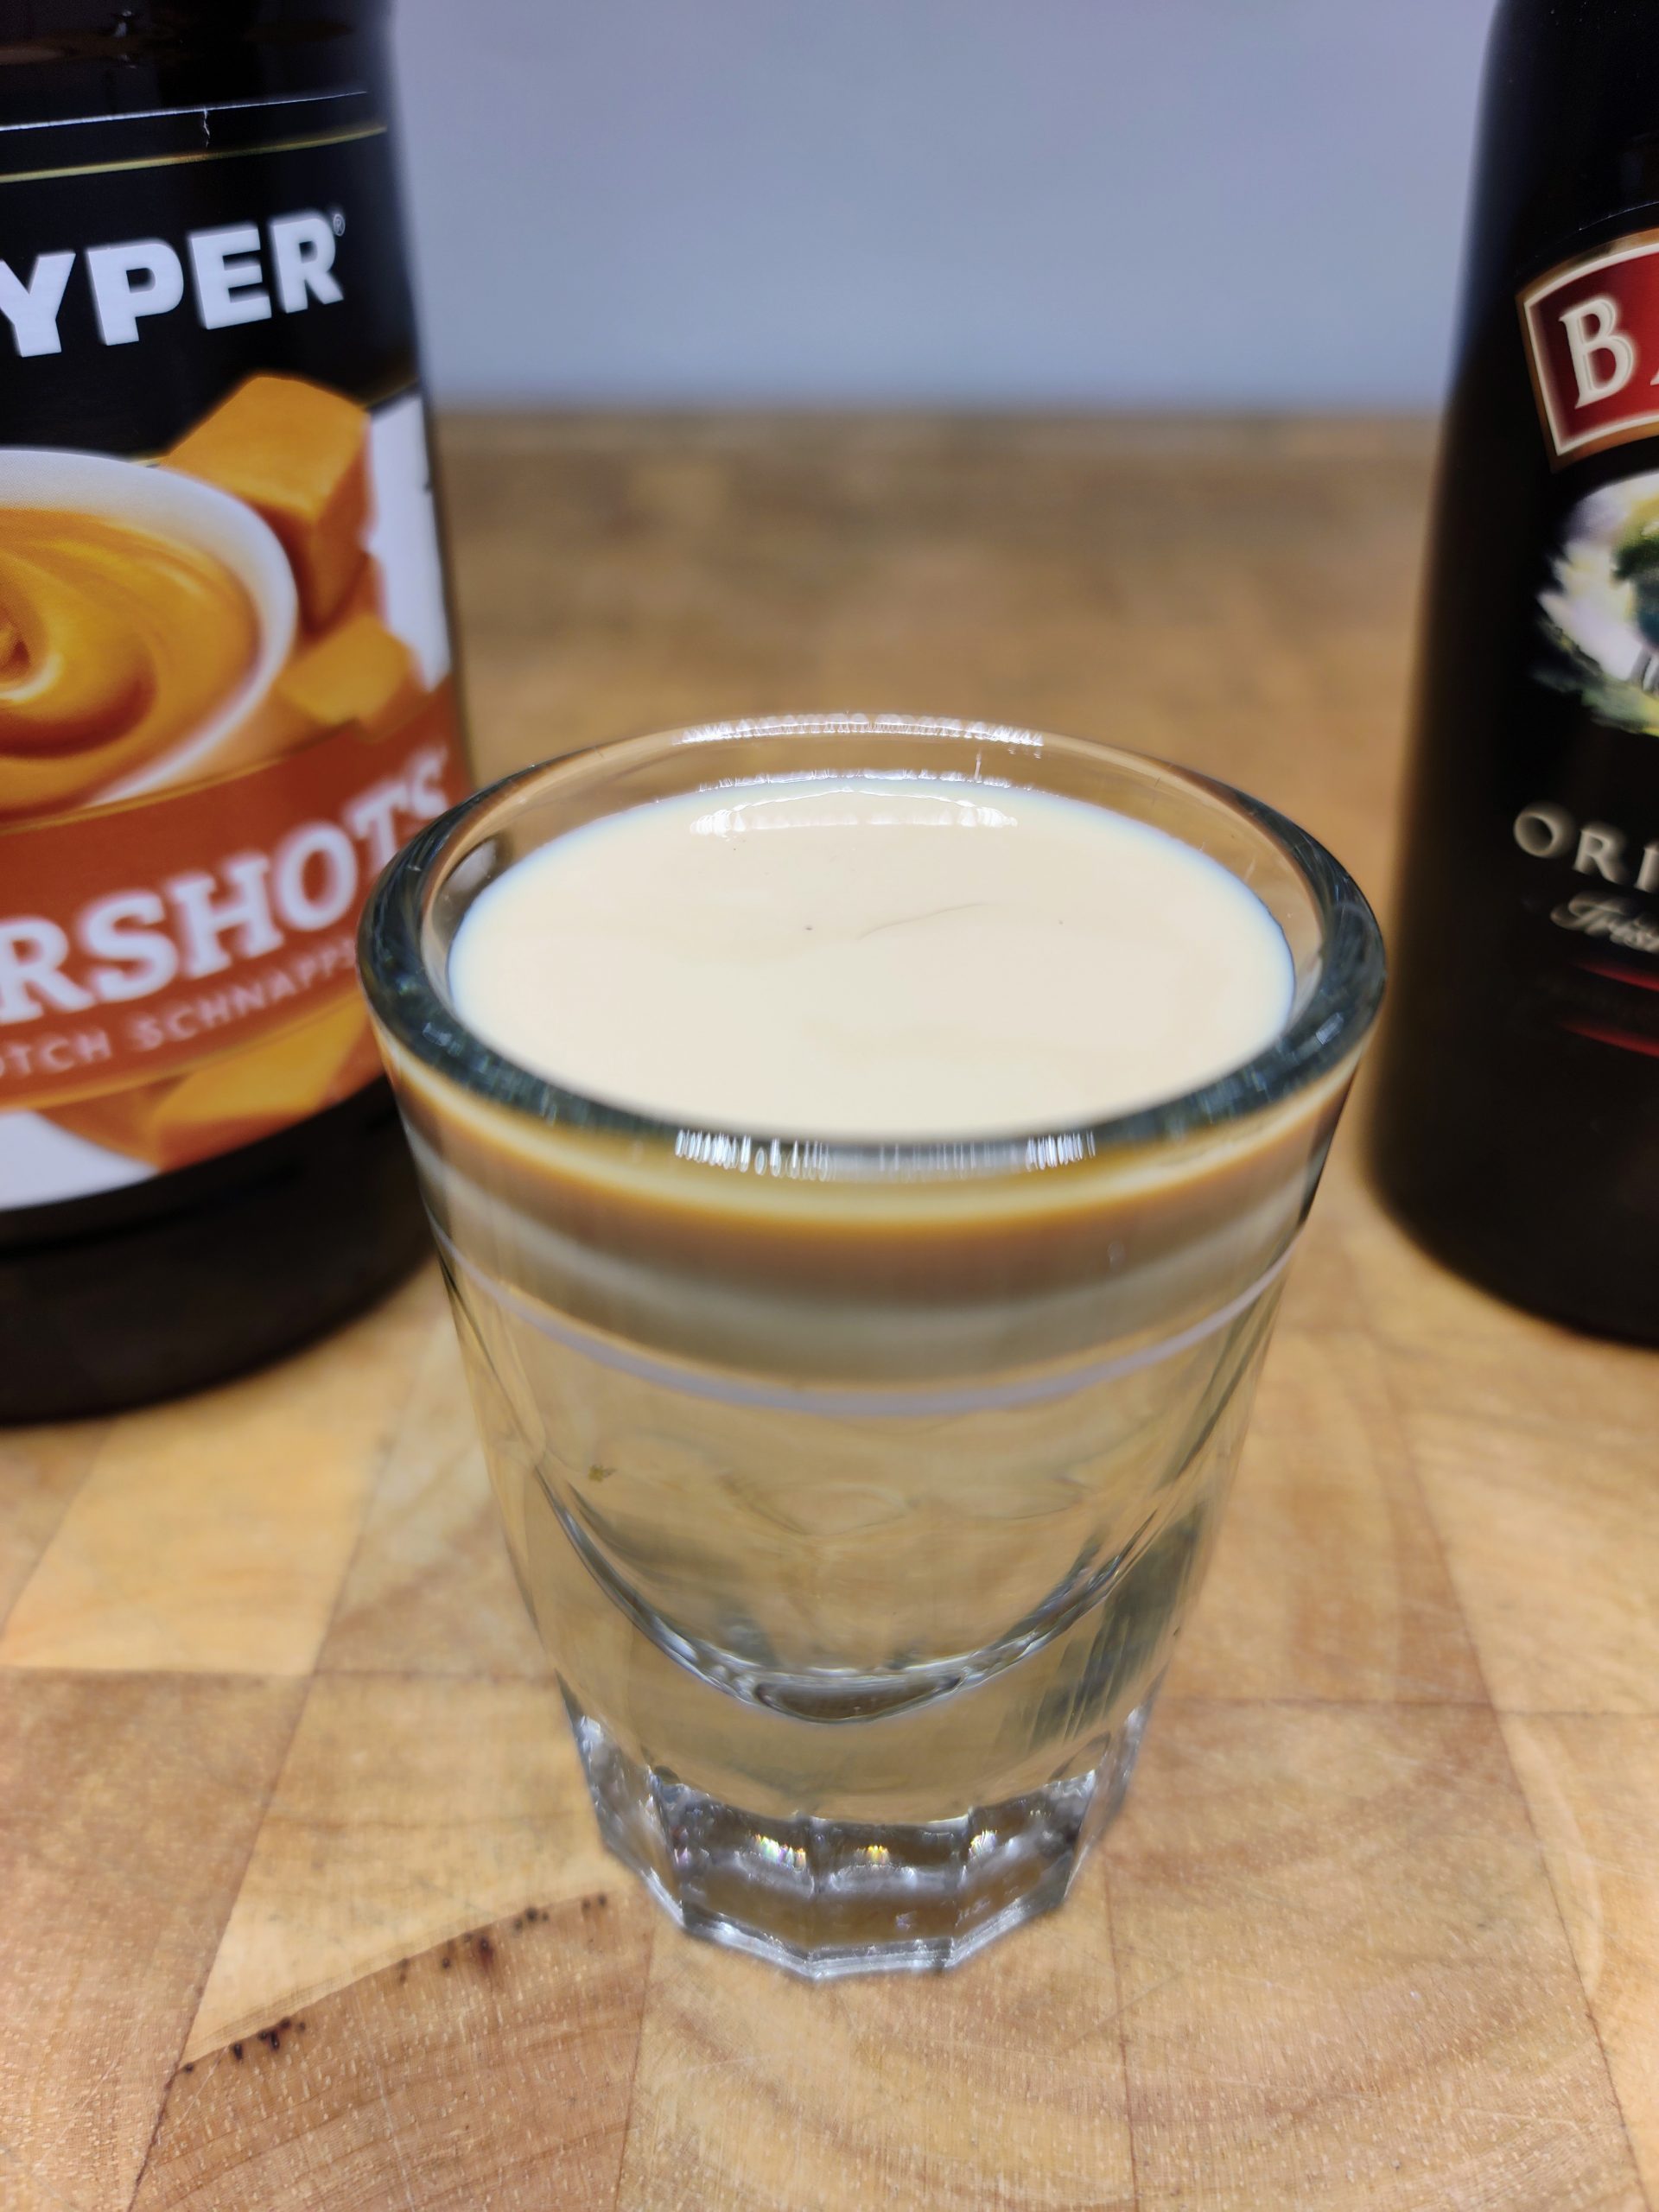 closeup of buttery nipple shot with bottles in background